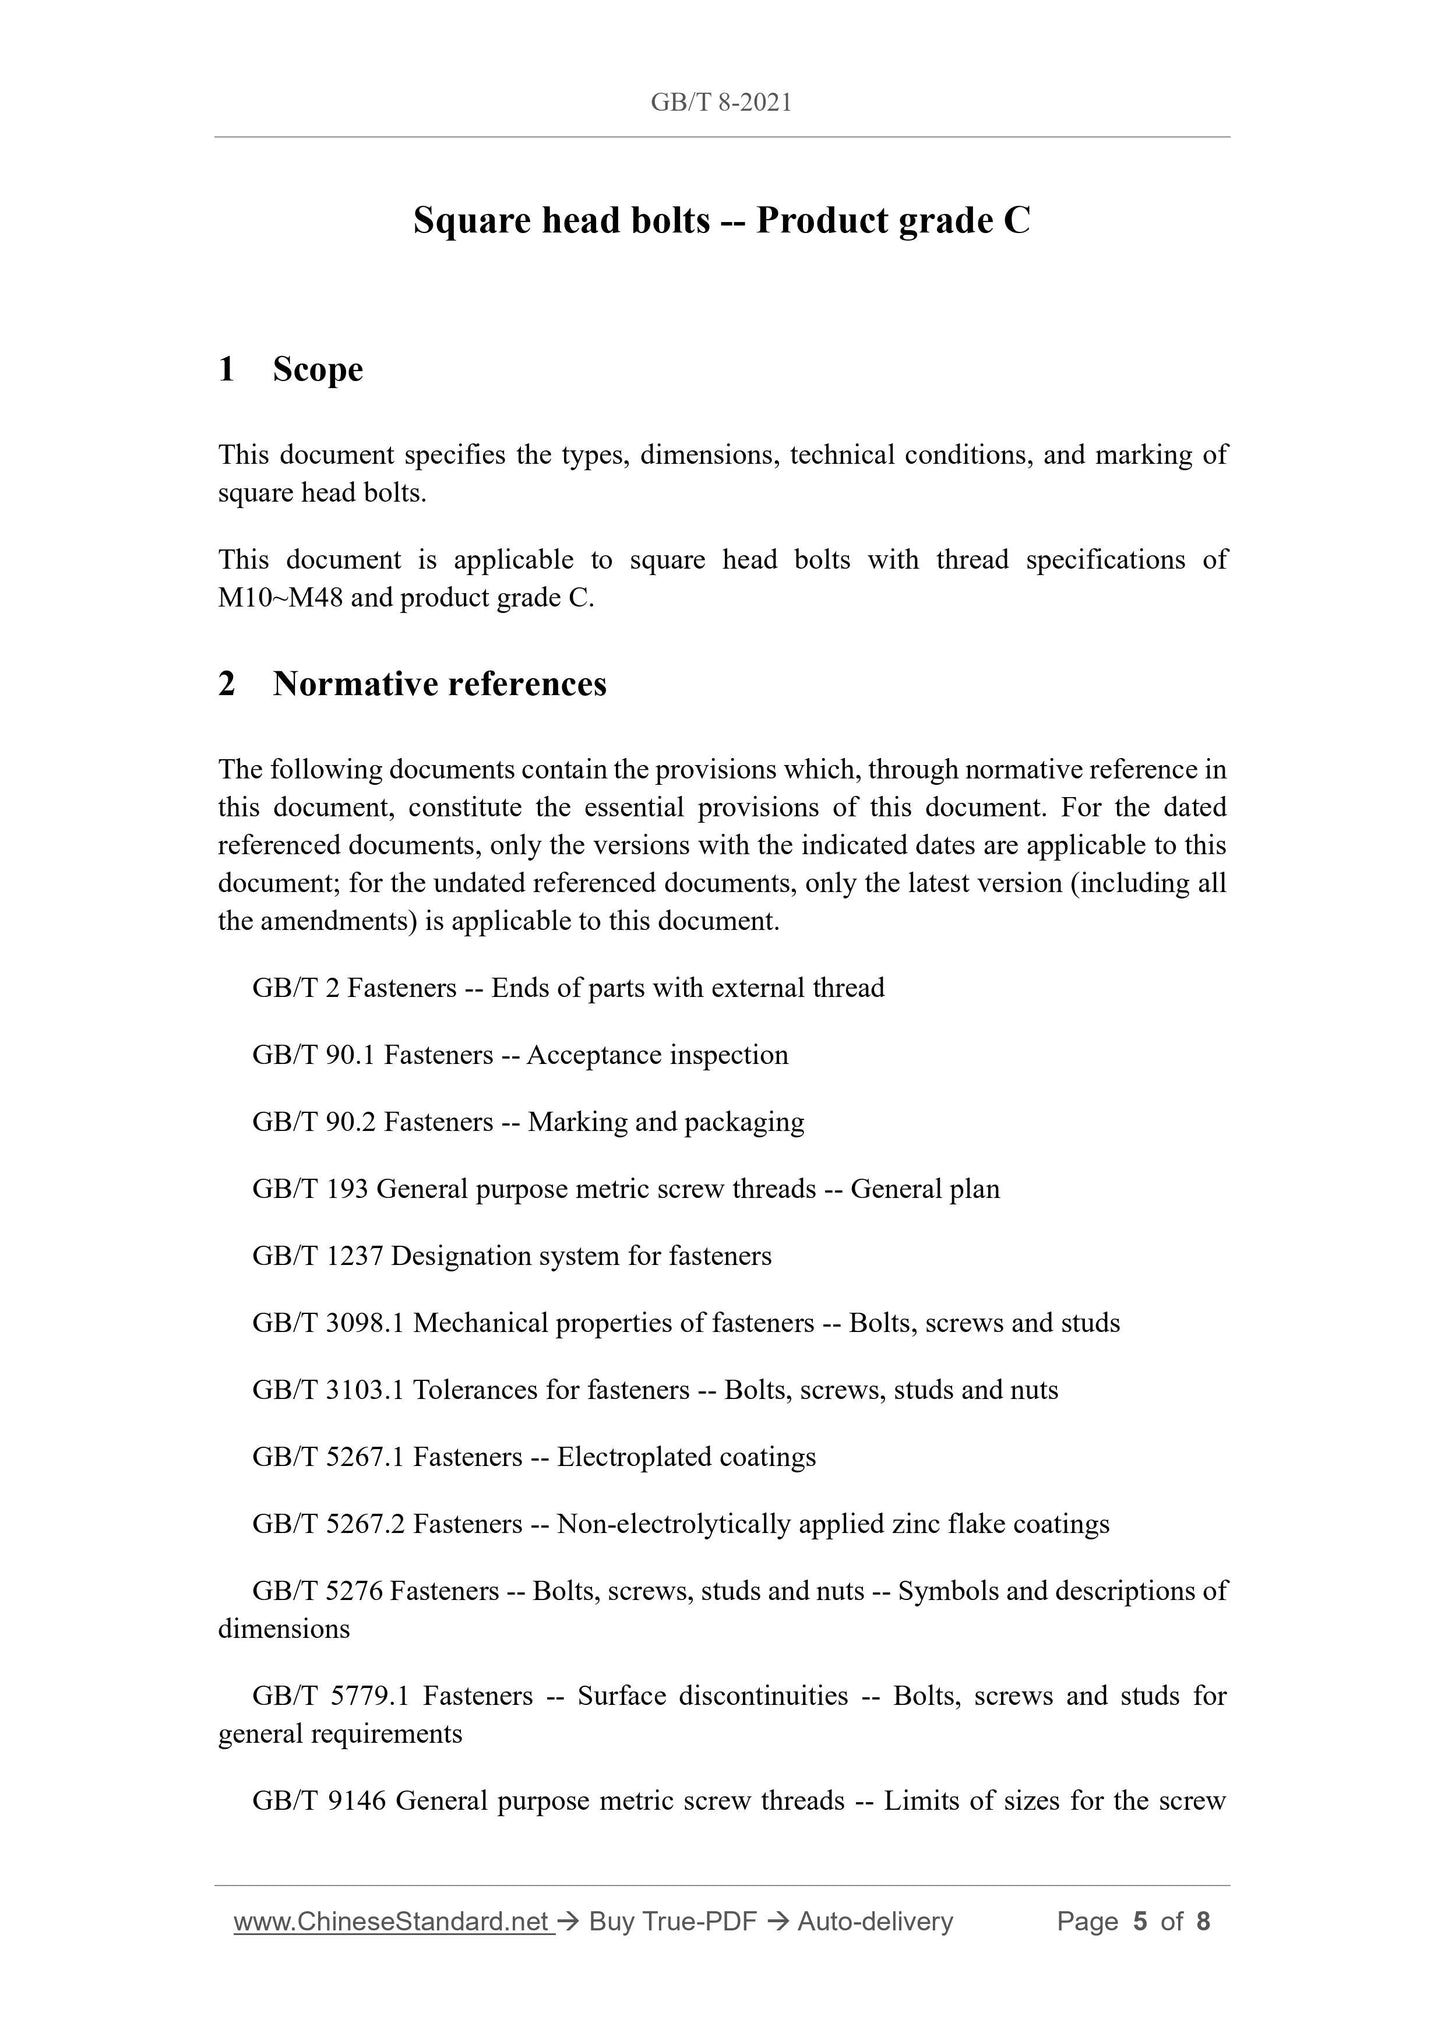 GB/T 8-2021 Page 4